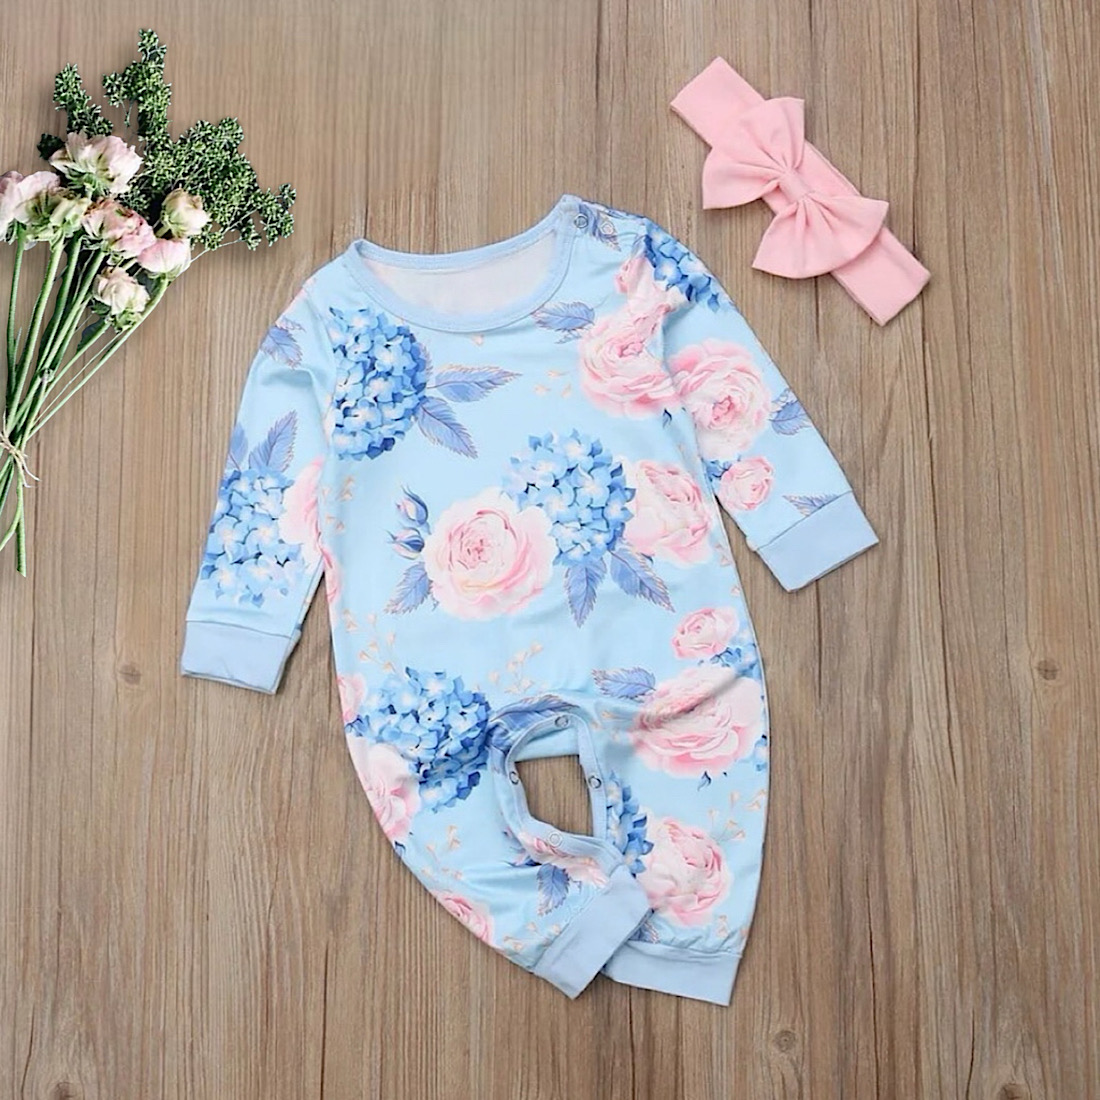 Infant Baby Girls Blue Floral Print Long Sleeve Romper Jumpsuit With Bow 2pc Clothing Set